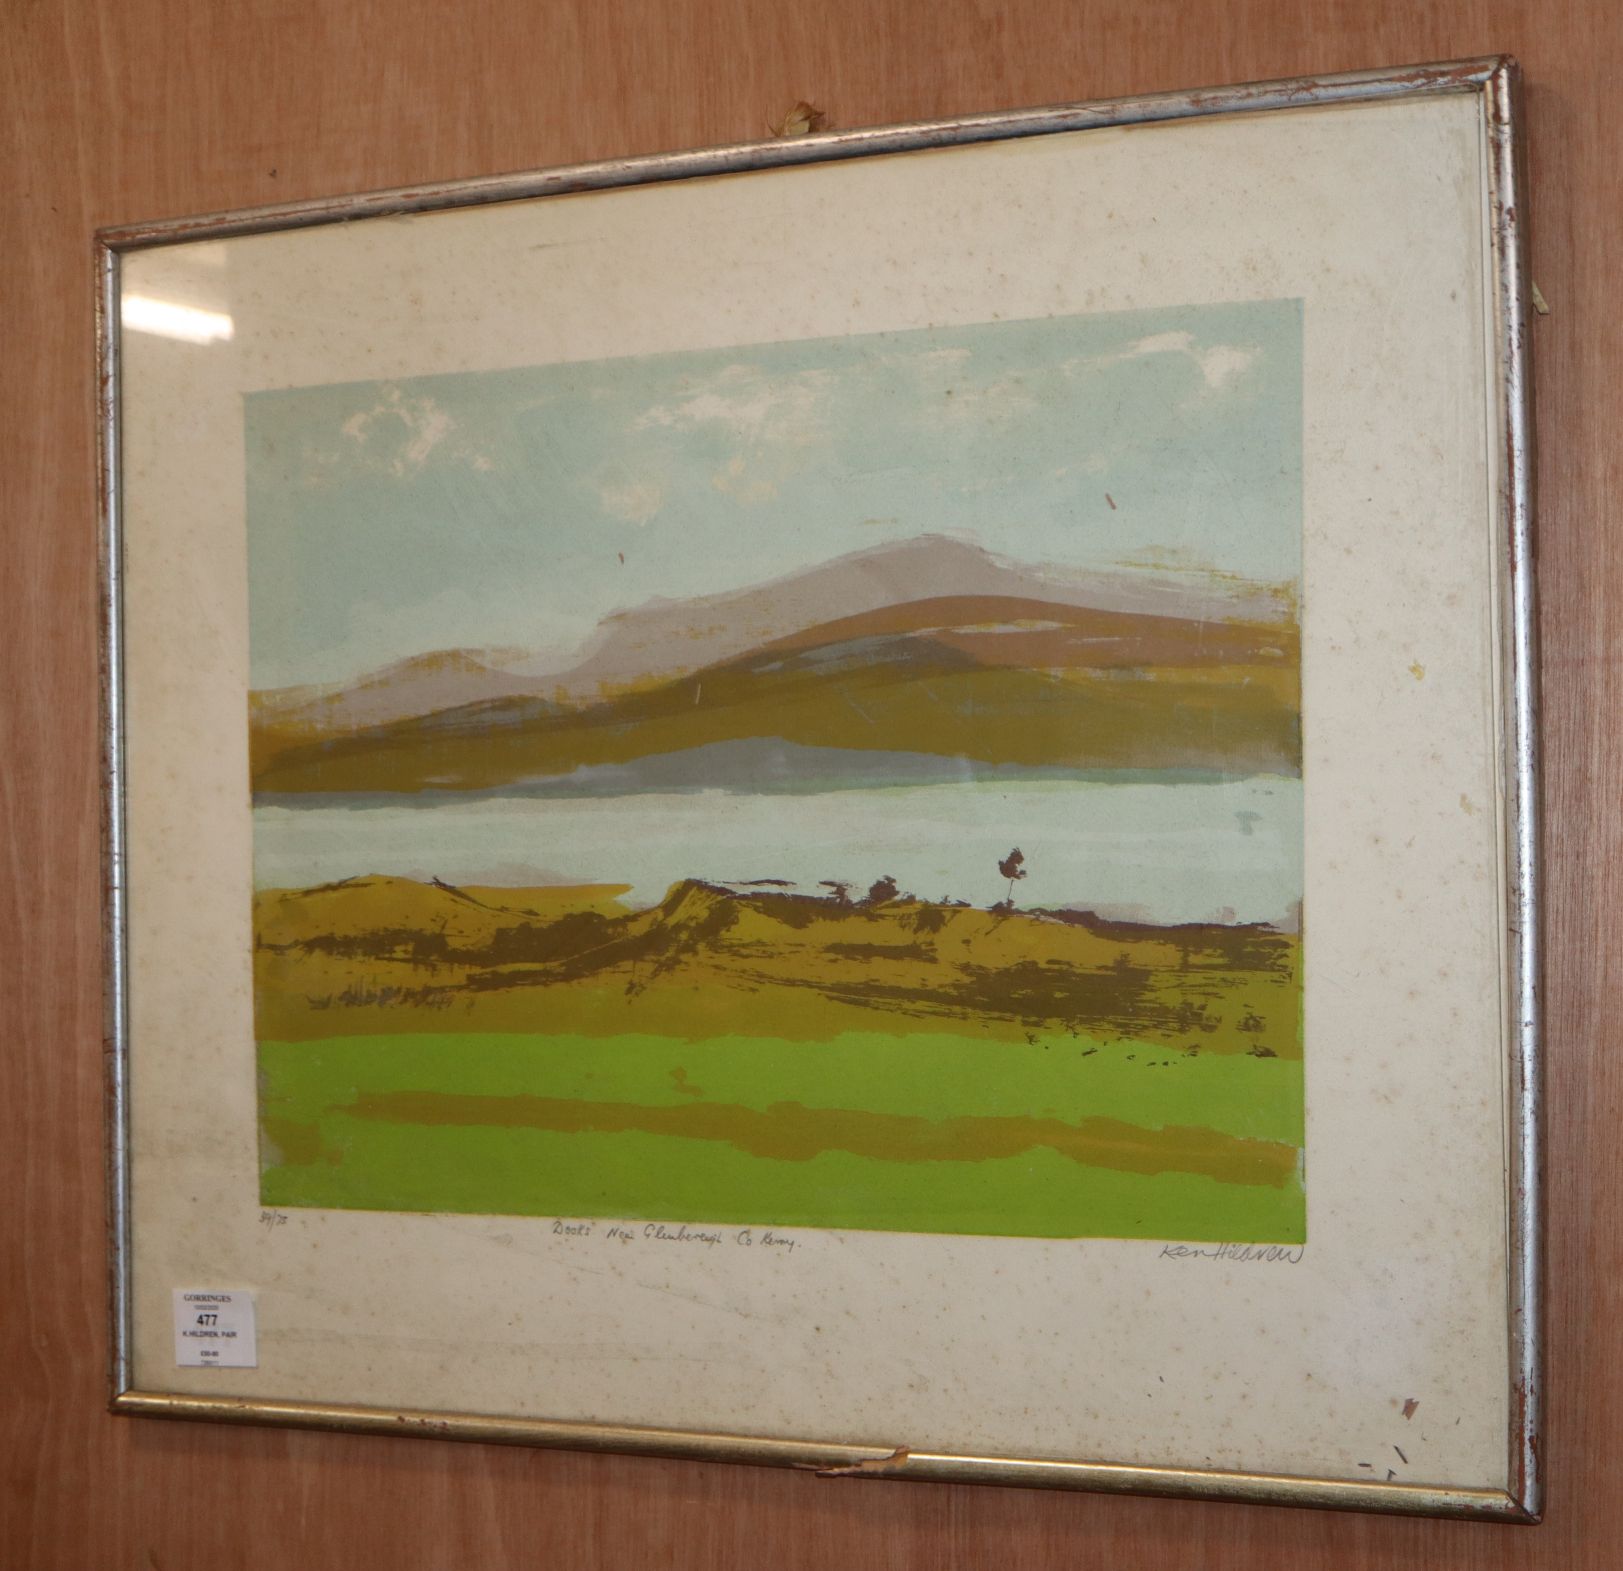 Ken Hildren, pair limited edition prints, 'Lough Imagh Co. Galway' and 'Dooks, Near Glenbereigh. Co.